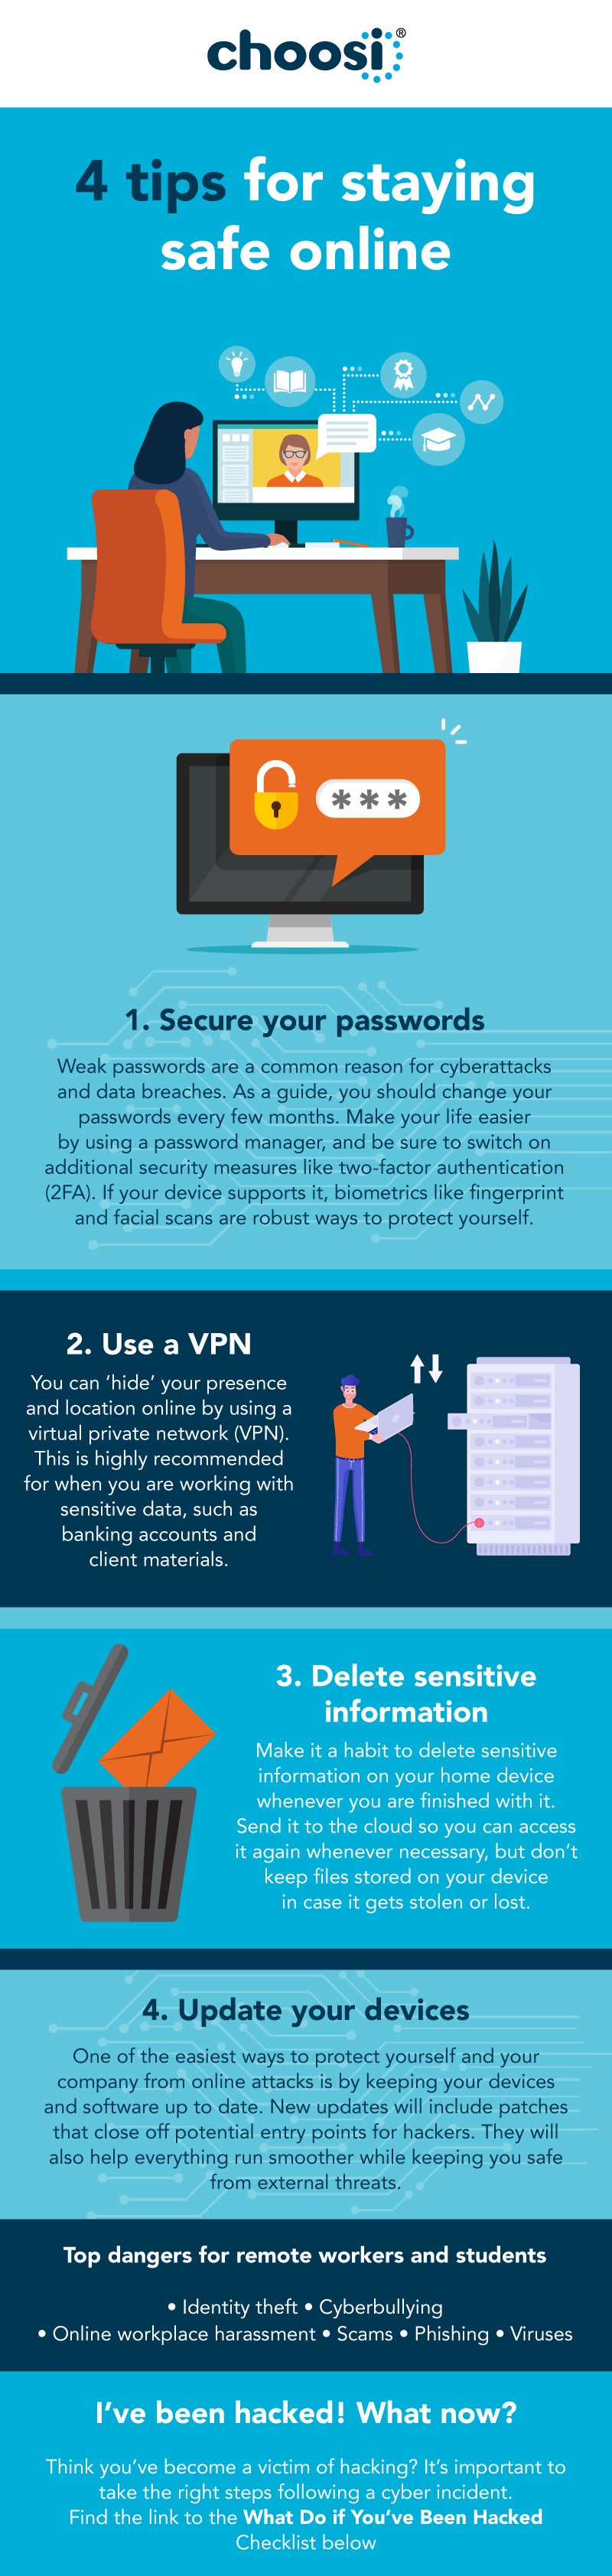 infographic of tips for staying safe online